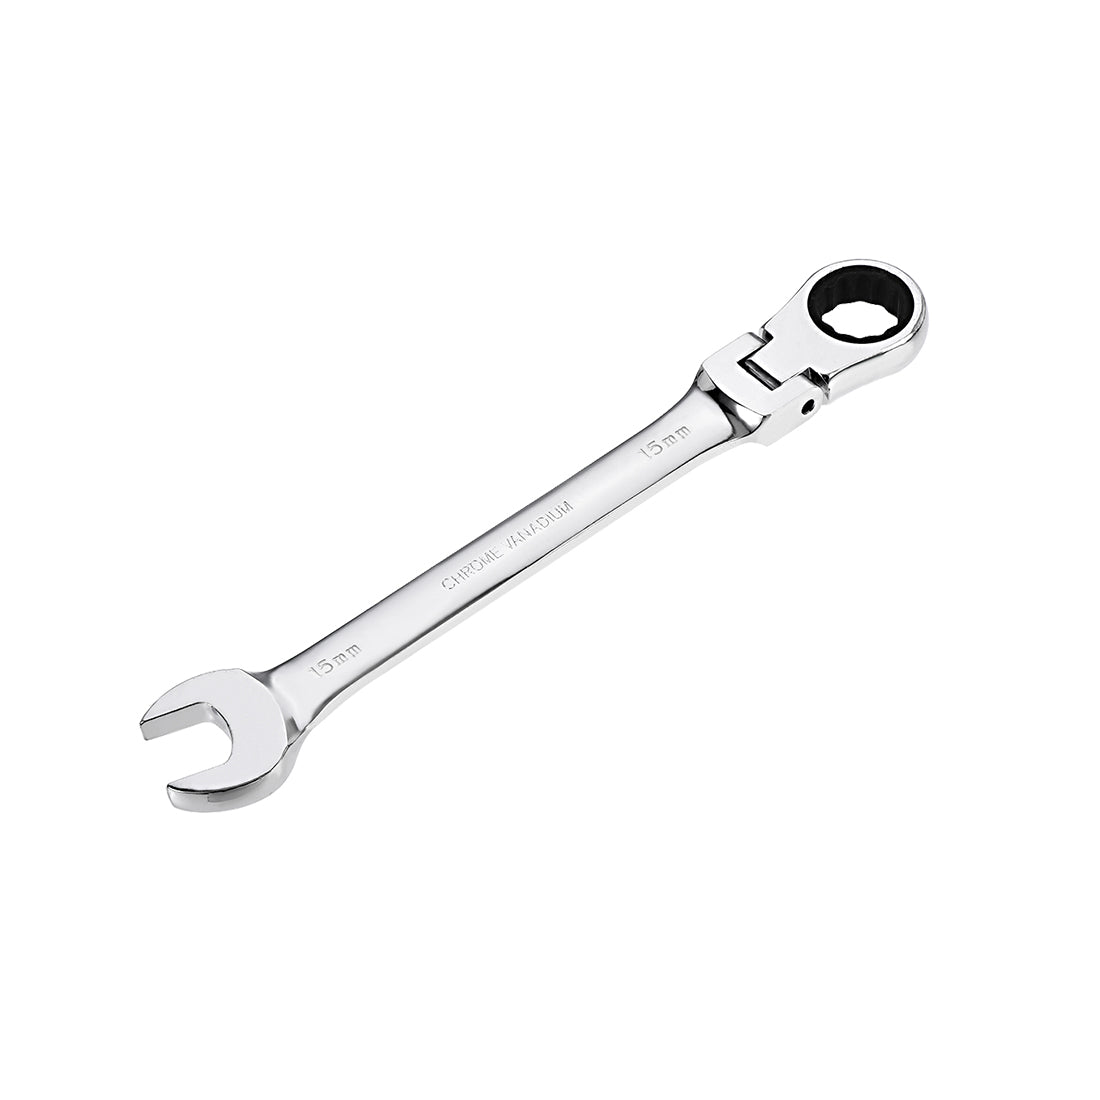 uxcell Uxcell Flex-Head Ratcheting Combination Wrench Metric 72 Teeth 12 Point Ratchet Box Ended Spanner Tools, Cr-V